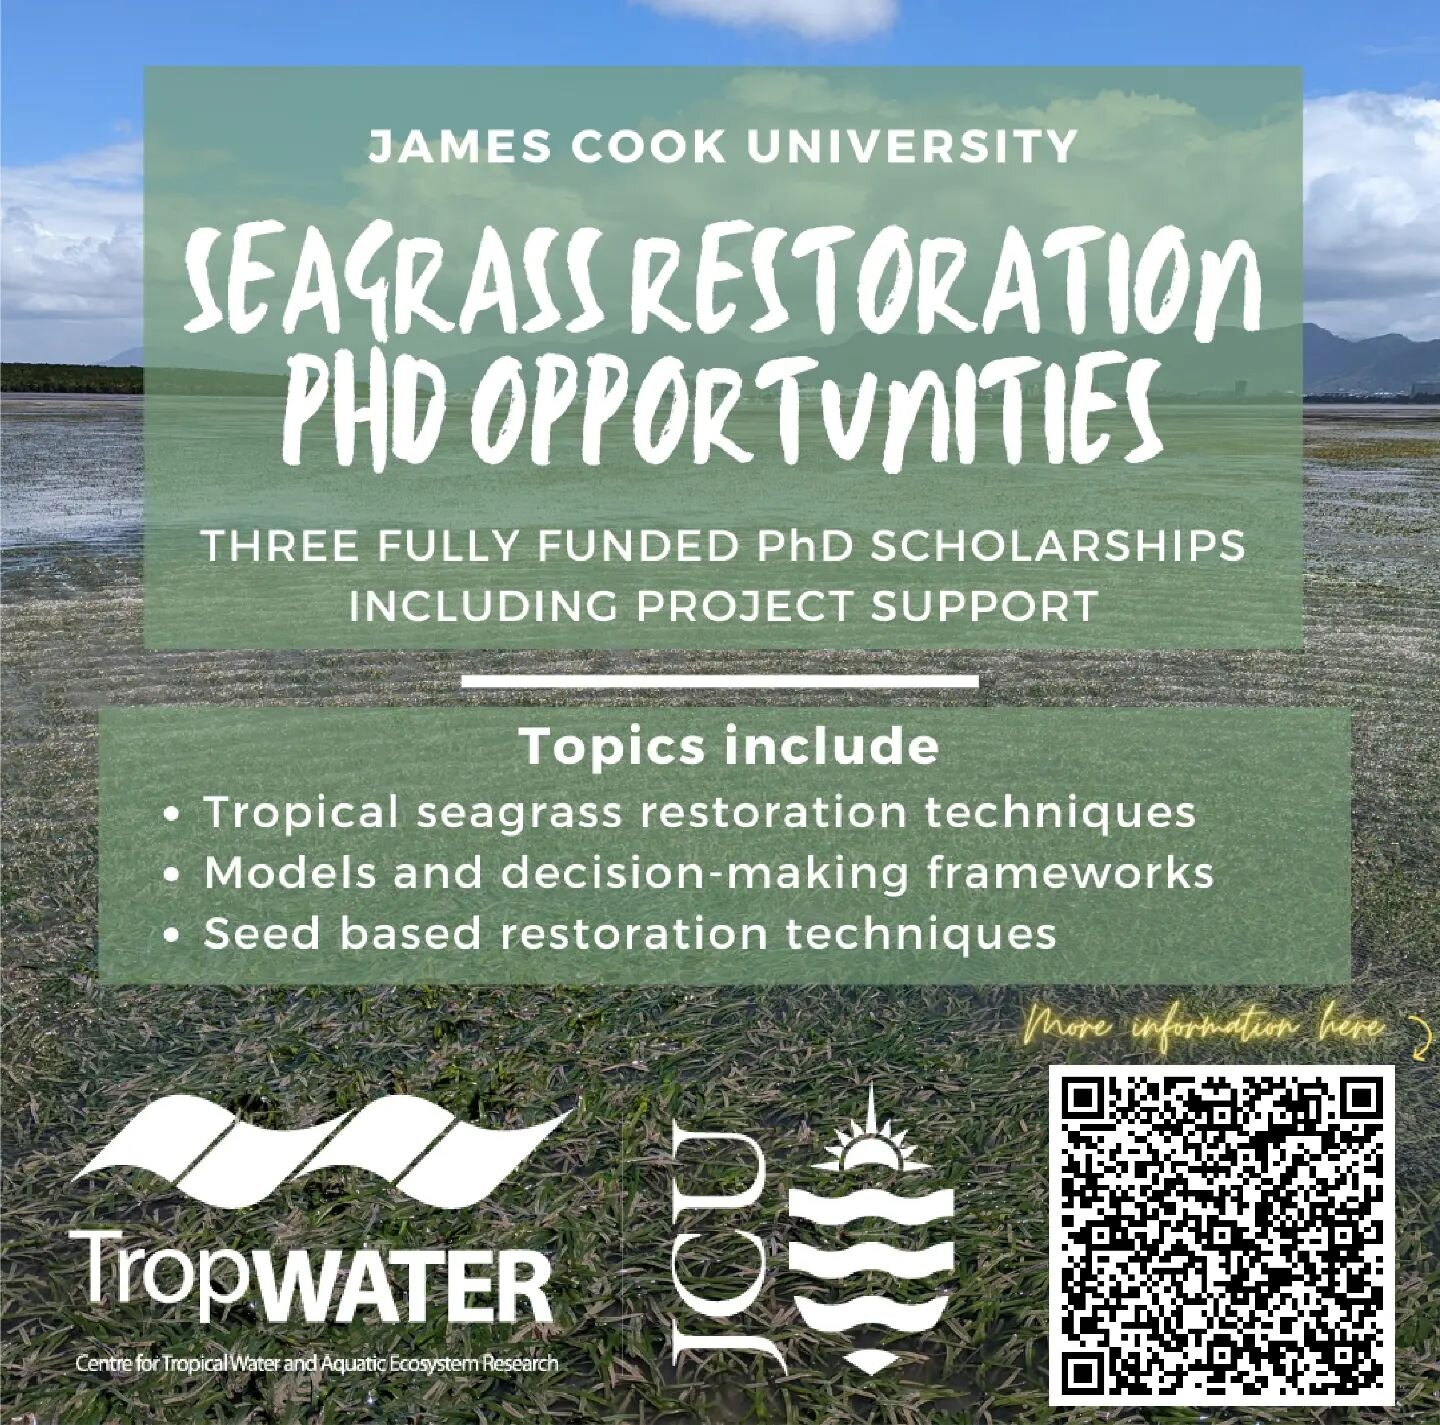 We have some PhD opportunities in our team! If you are interested in seagrass restoration have a look at the web page for more information. Scholarship funding and project funding available for these.

More info here: https://www.jcu.edu.au/graduate-